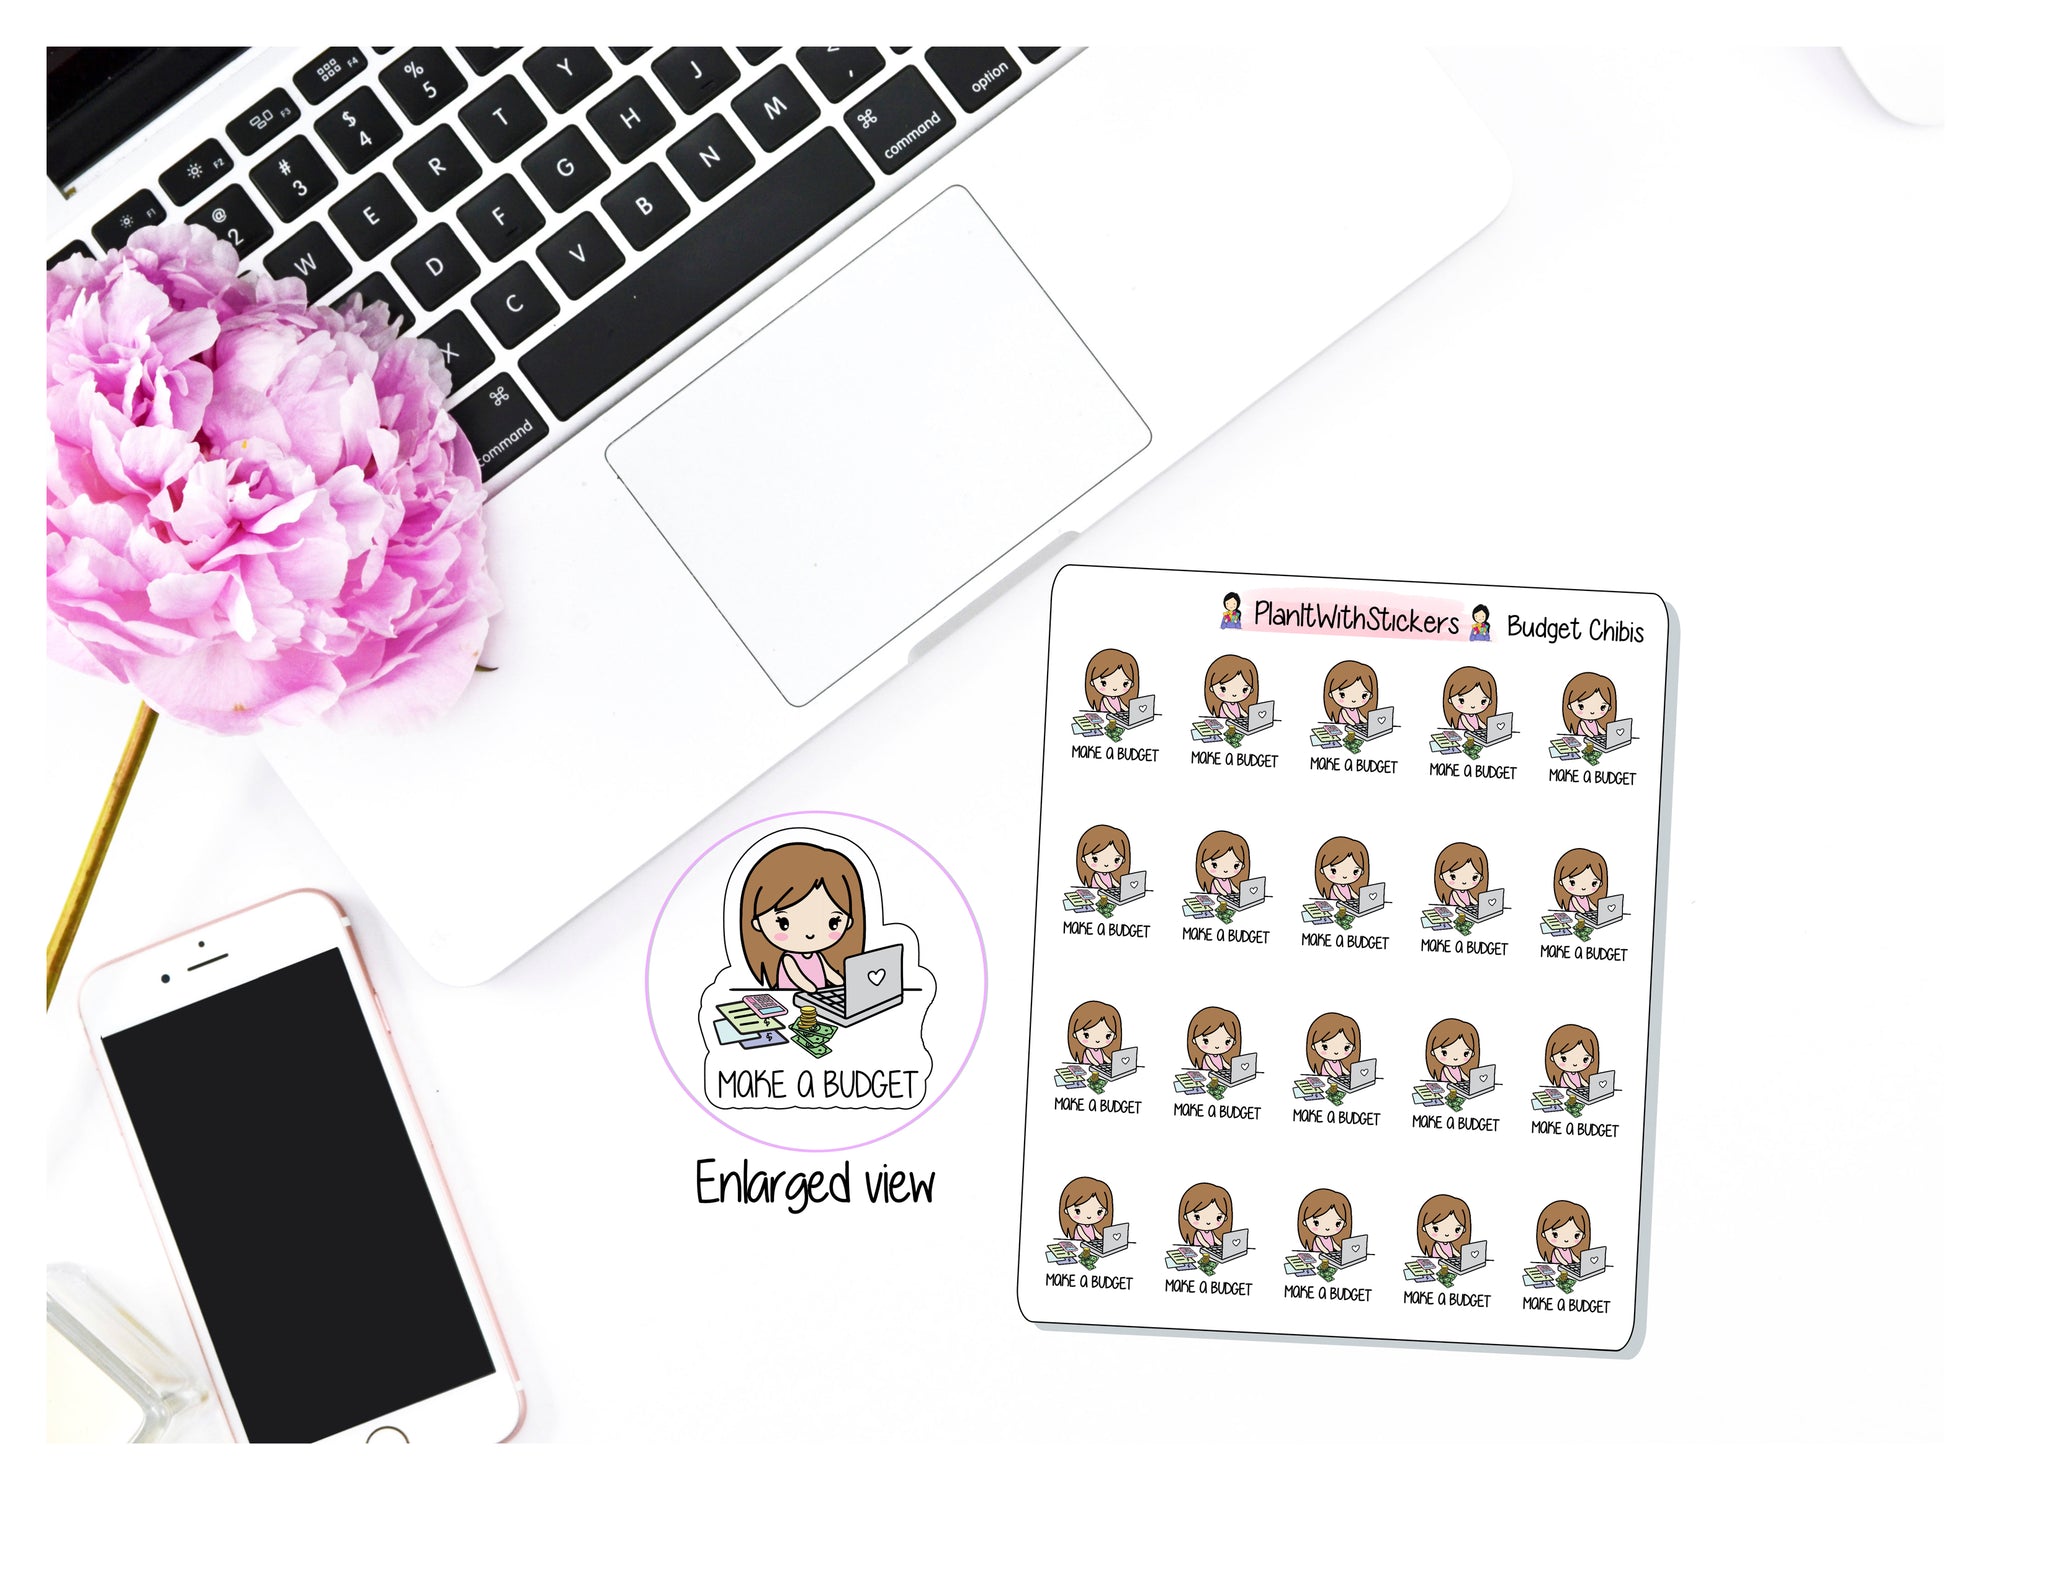 Make a Budget Chibi Money Finance Character Sticker for , Plum Paper, Recollections, and similar planners